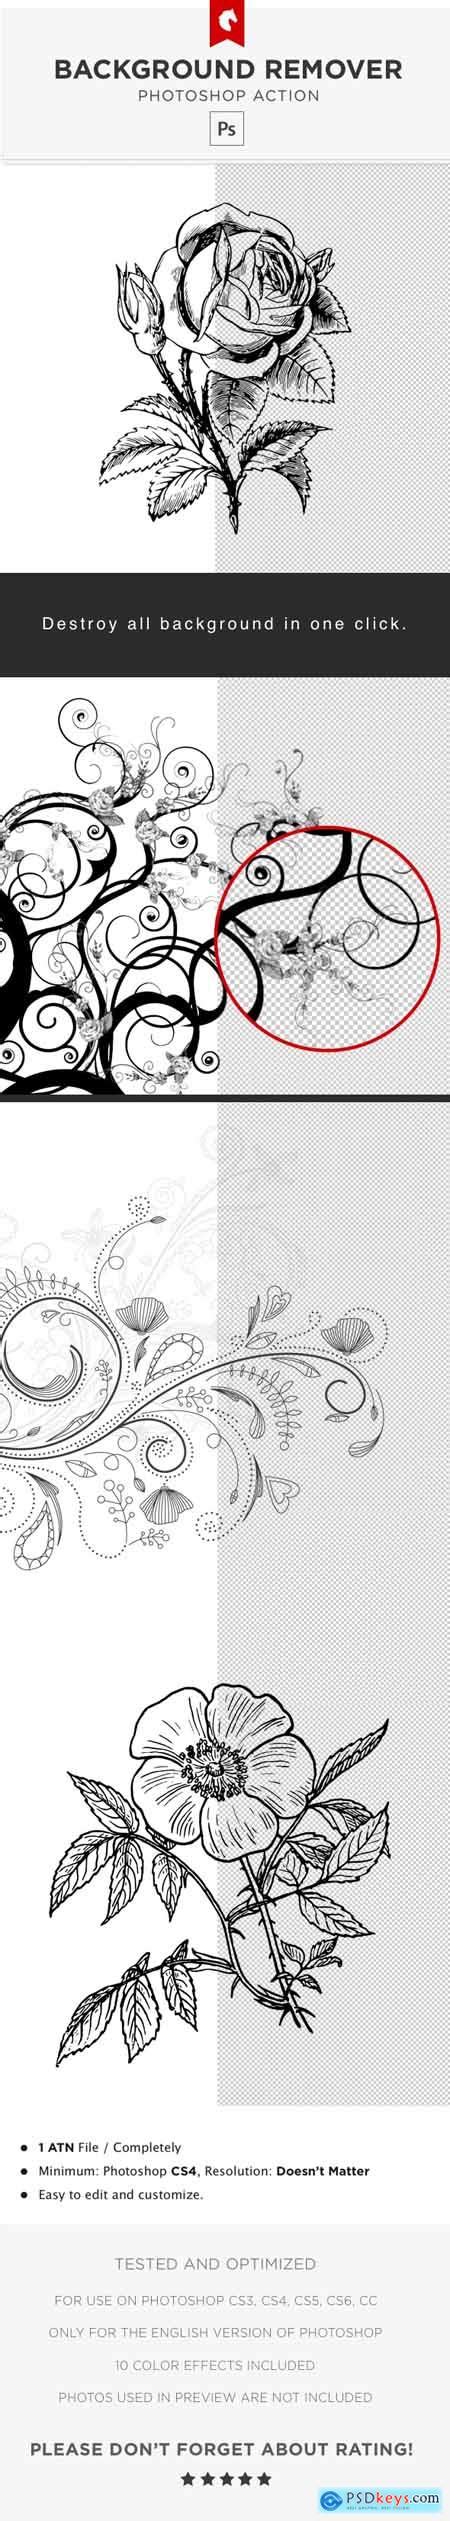 graphicriver white background remover photoshop action